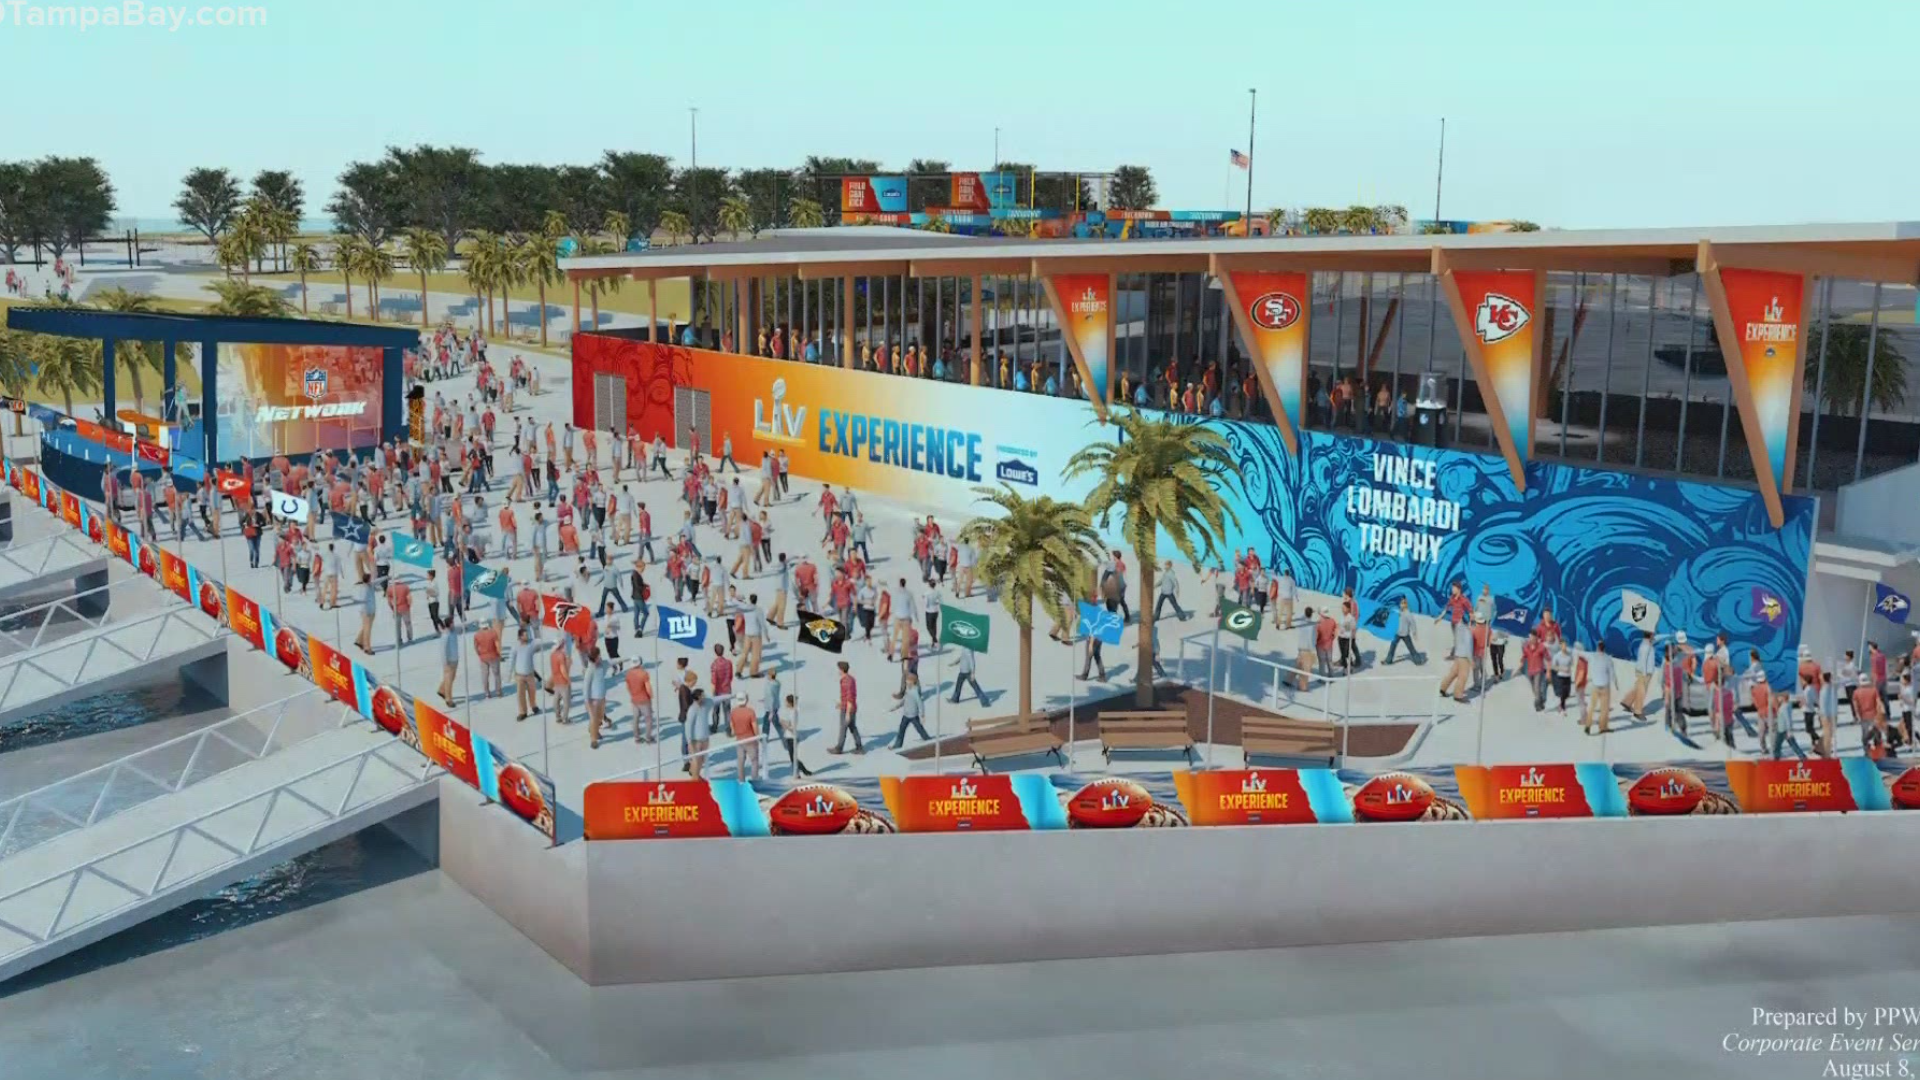 We got a sneak peek into the ultimate football fan experience coming to Tampa.